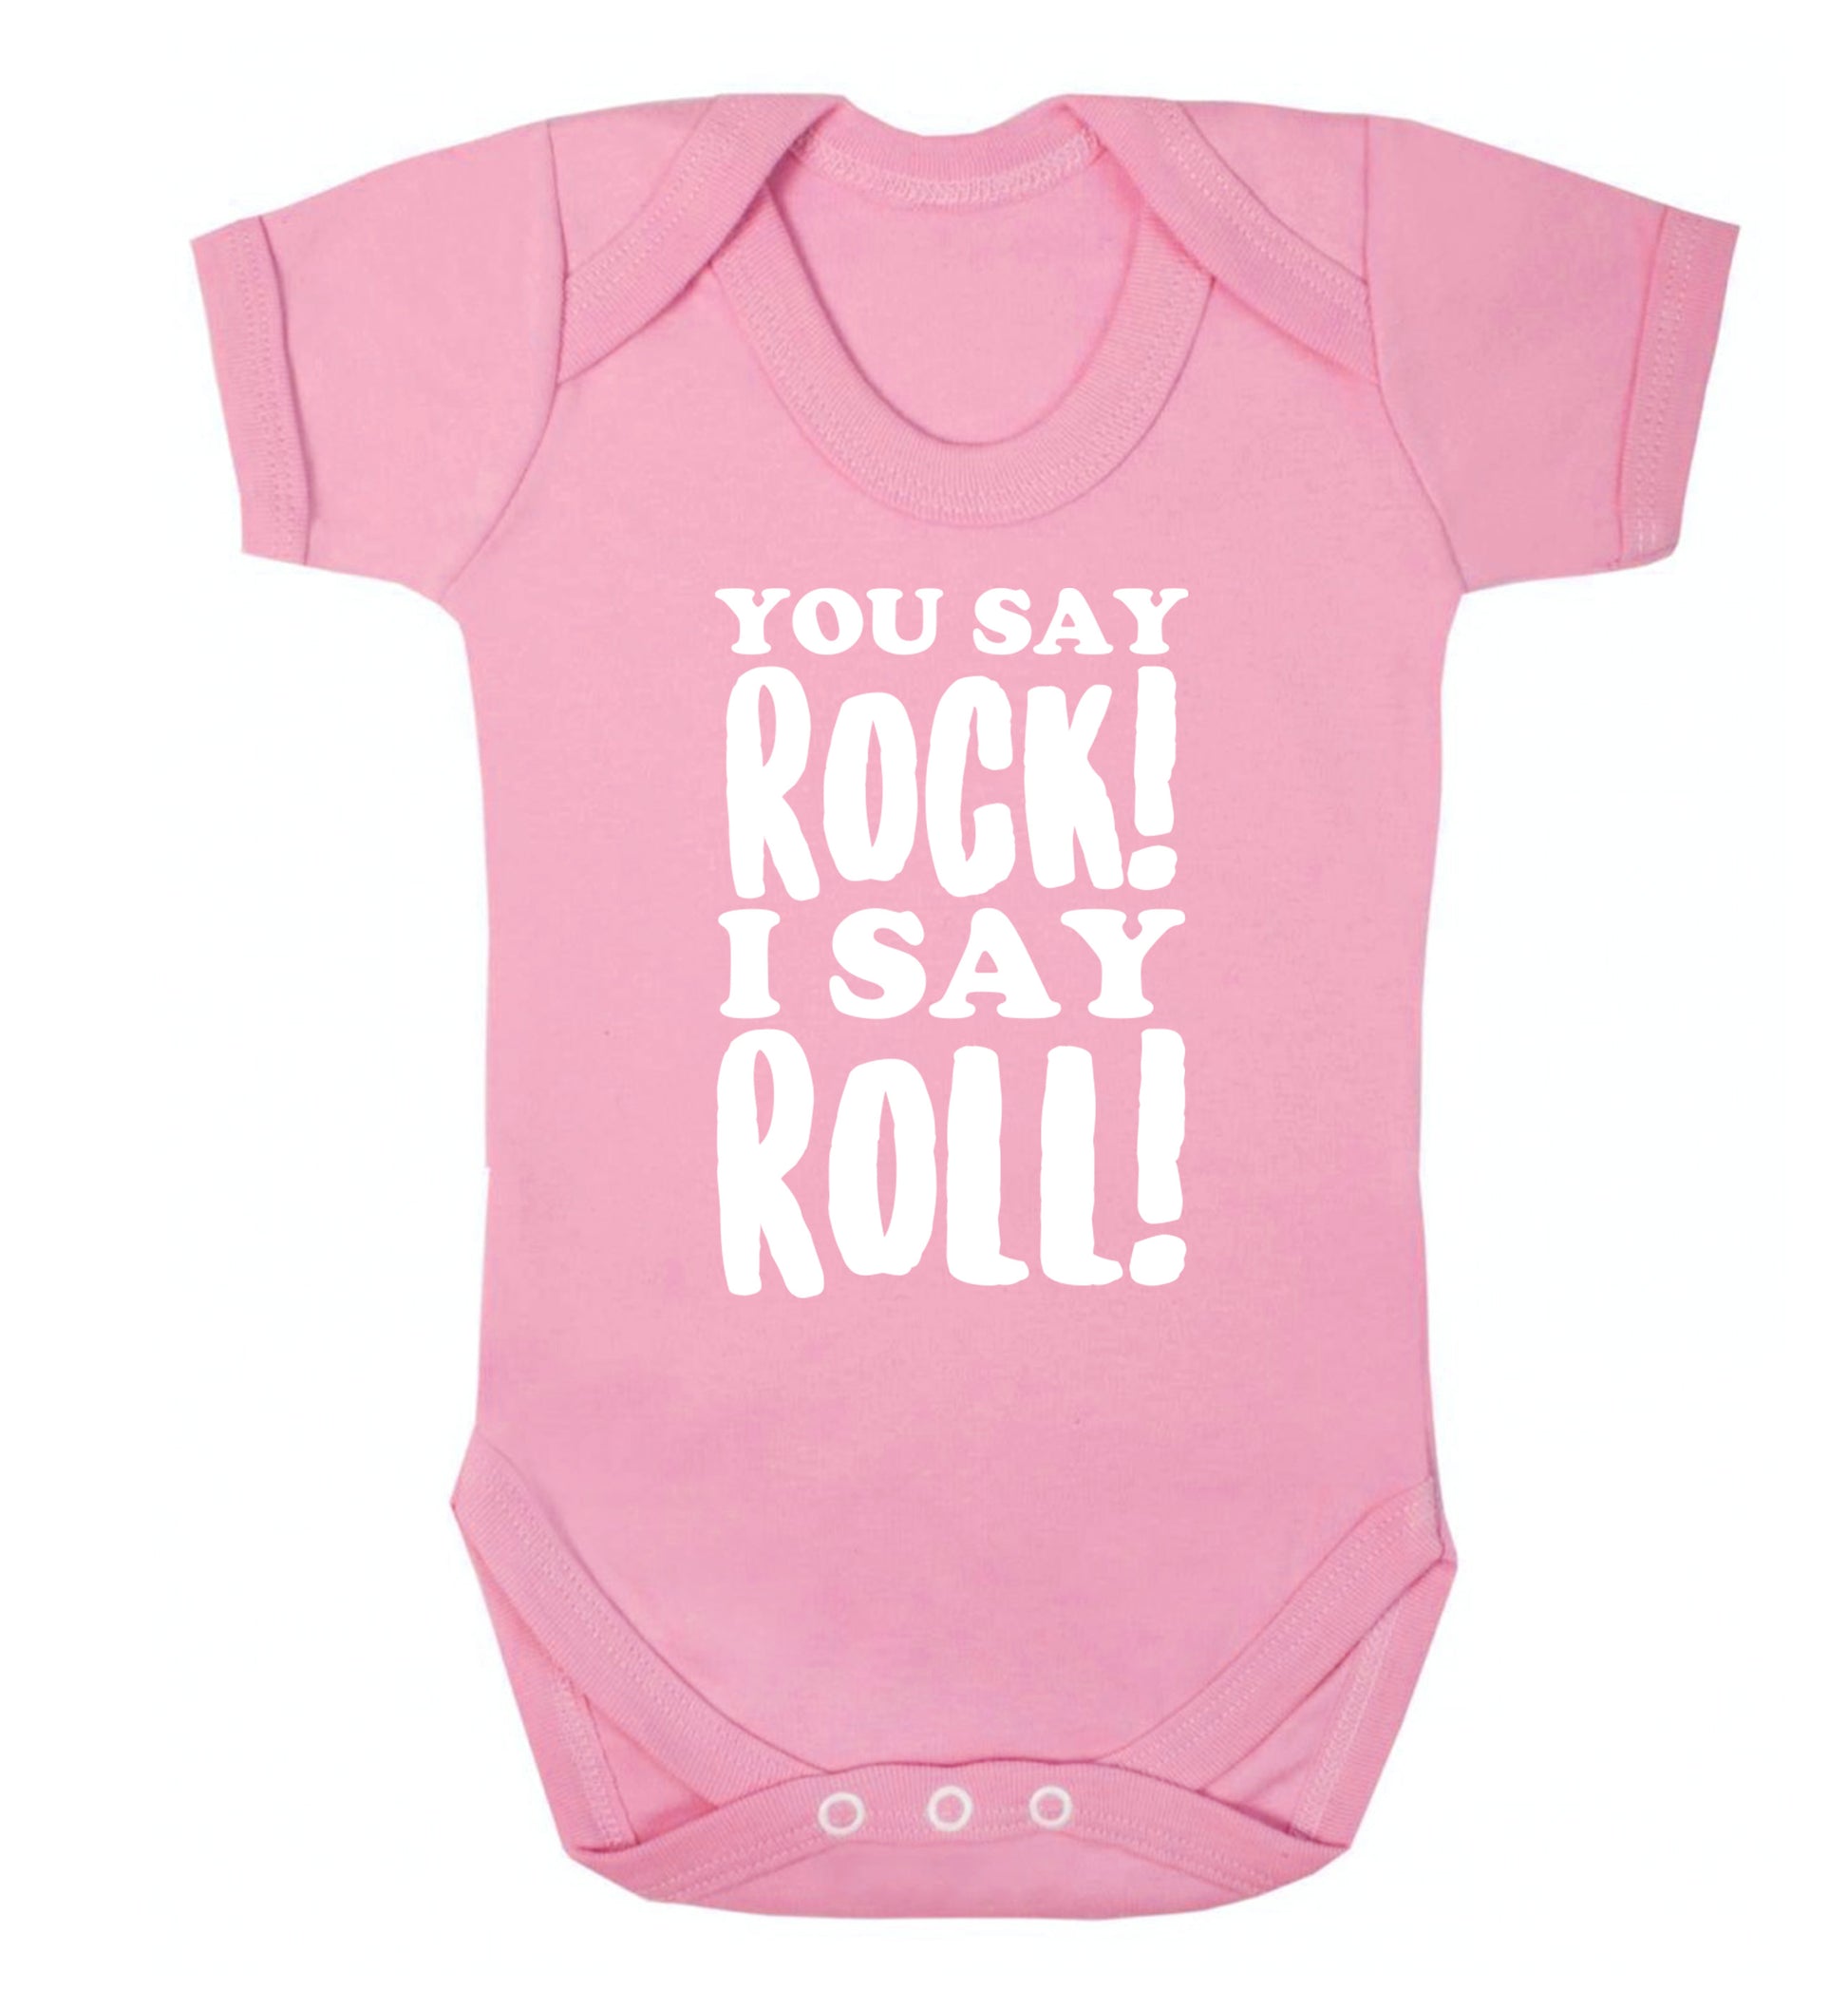 You say rock I say roll! Baby Vest pale pink 18-24 months